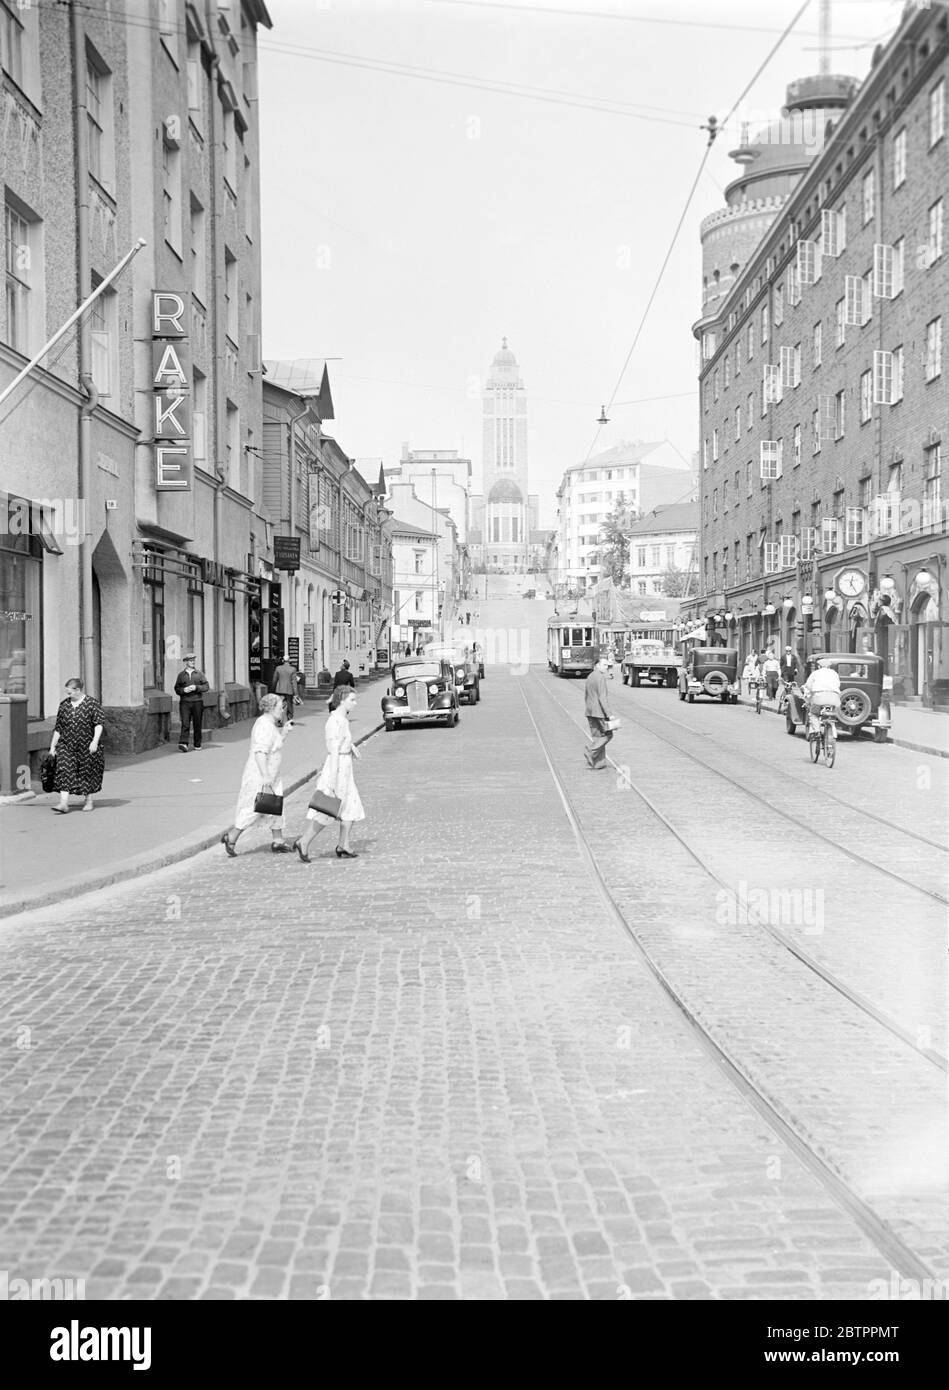 Helsinki and personalities. Viwe of Siltasaarenkatu, one of Helsinki's main streets. In the background the Ka Llio Church, one of the city's most famous architectural sights. Stock Photo